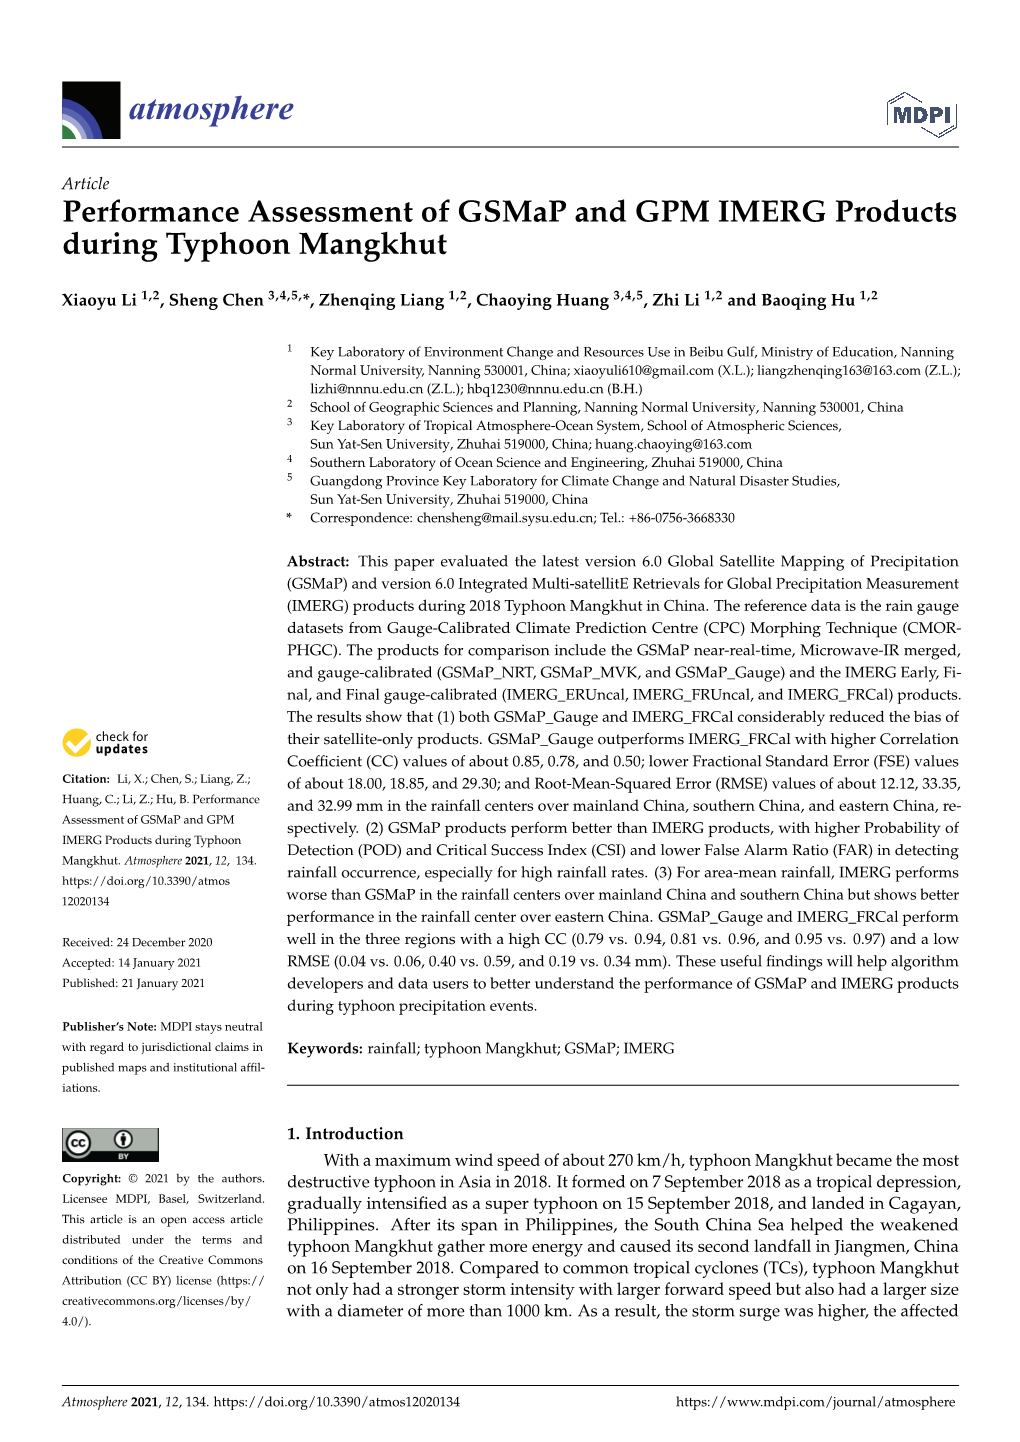 Performance Assessment of Gsmap and GPM IMERG Products During Typhoon Mangkhut